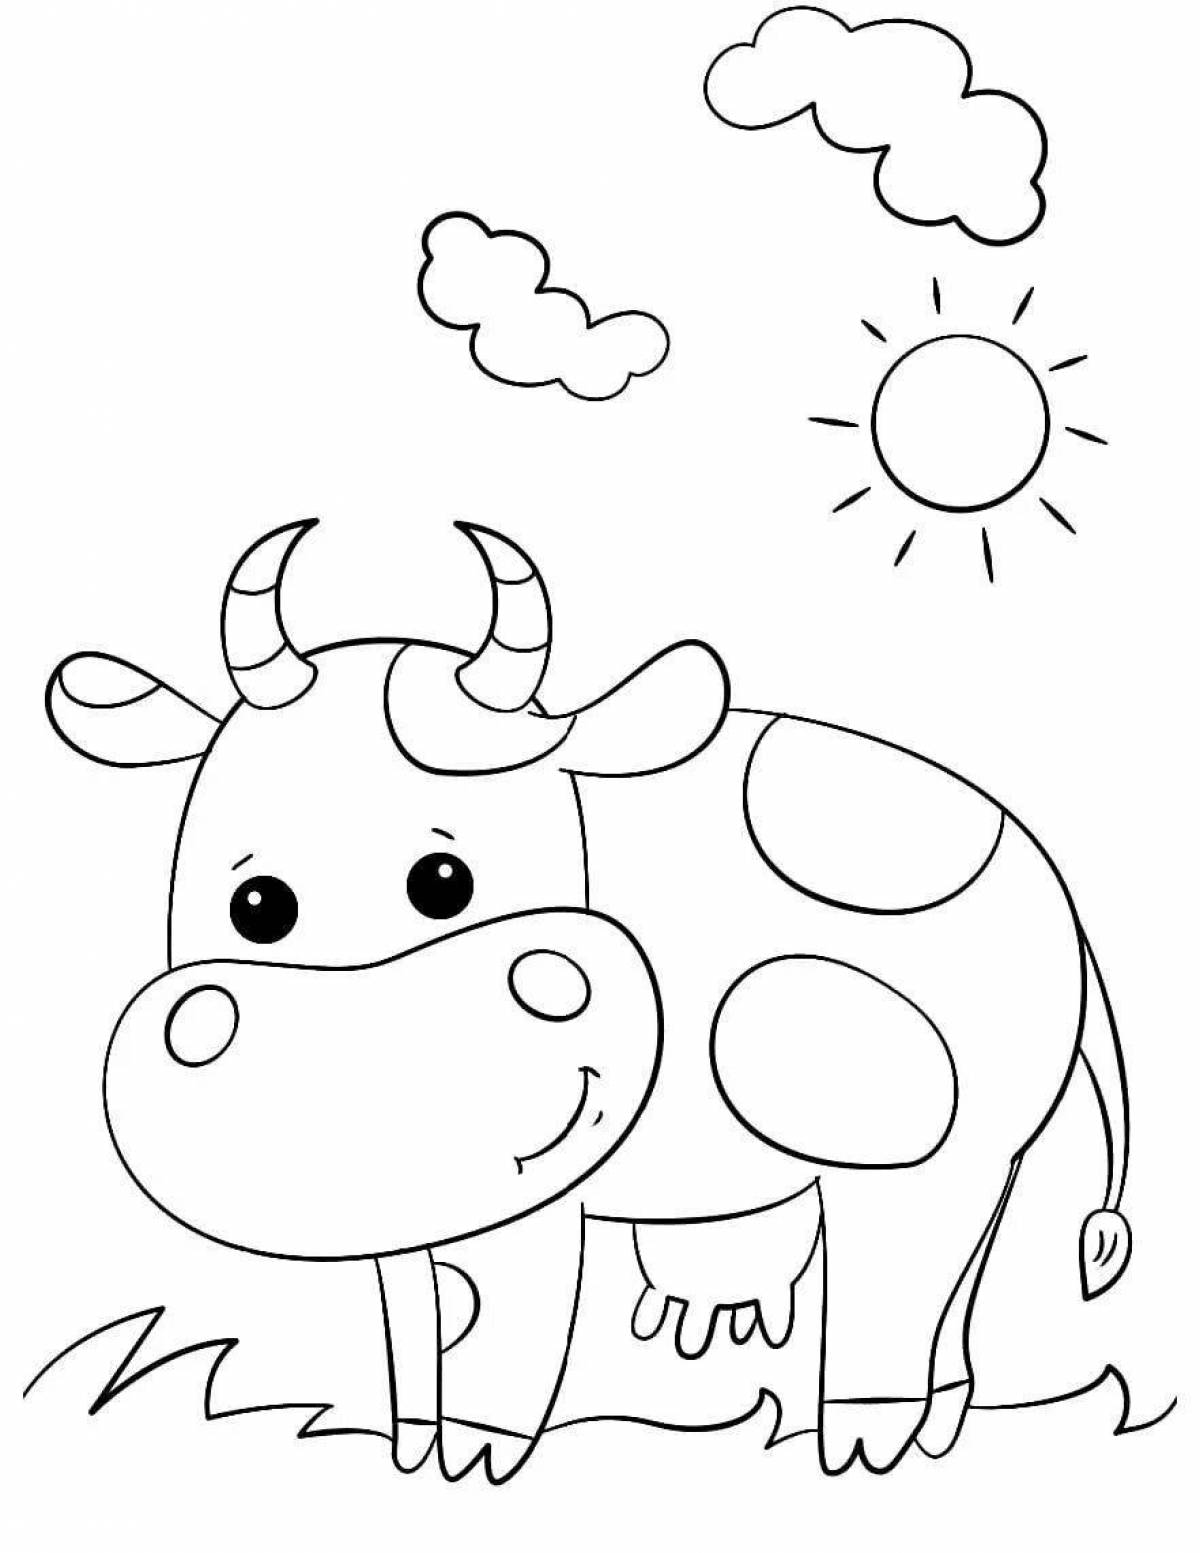 Colorful cow coloring page